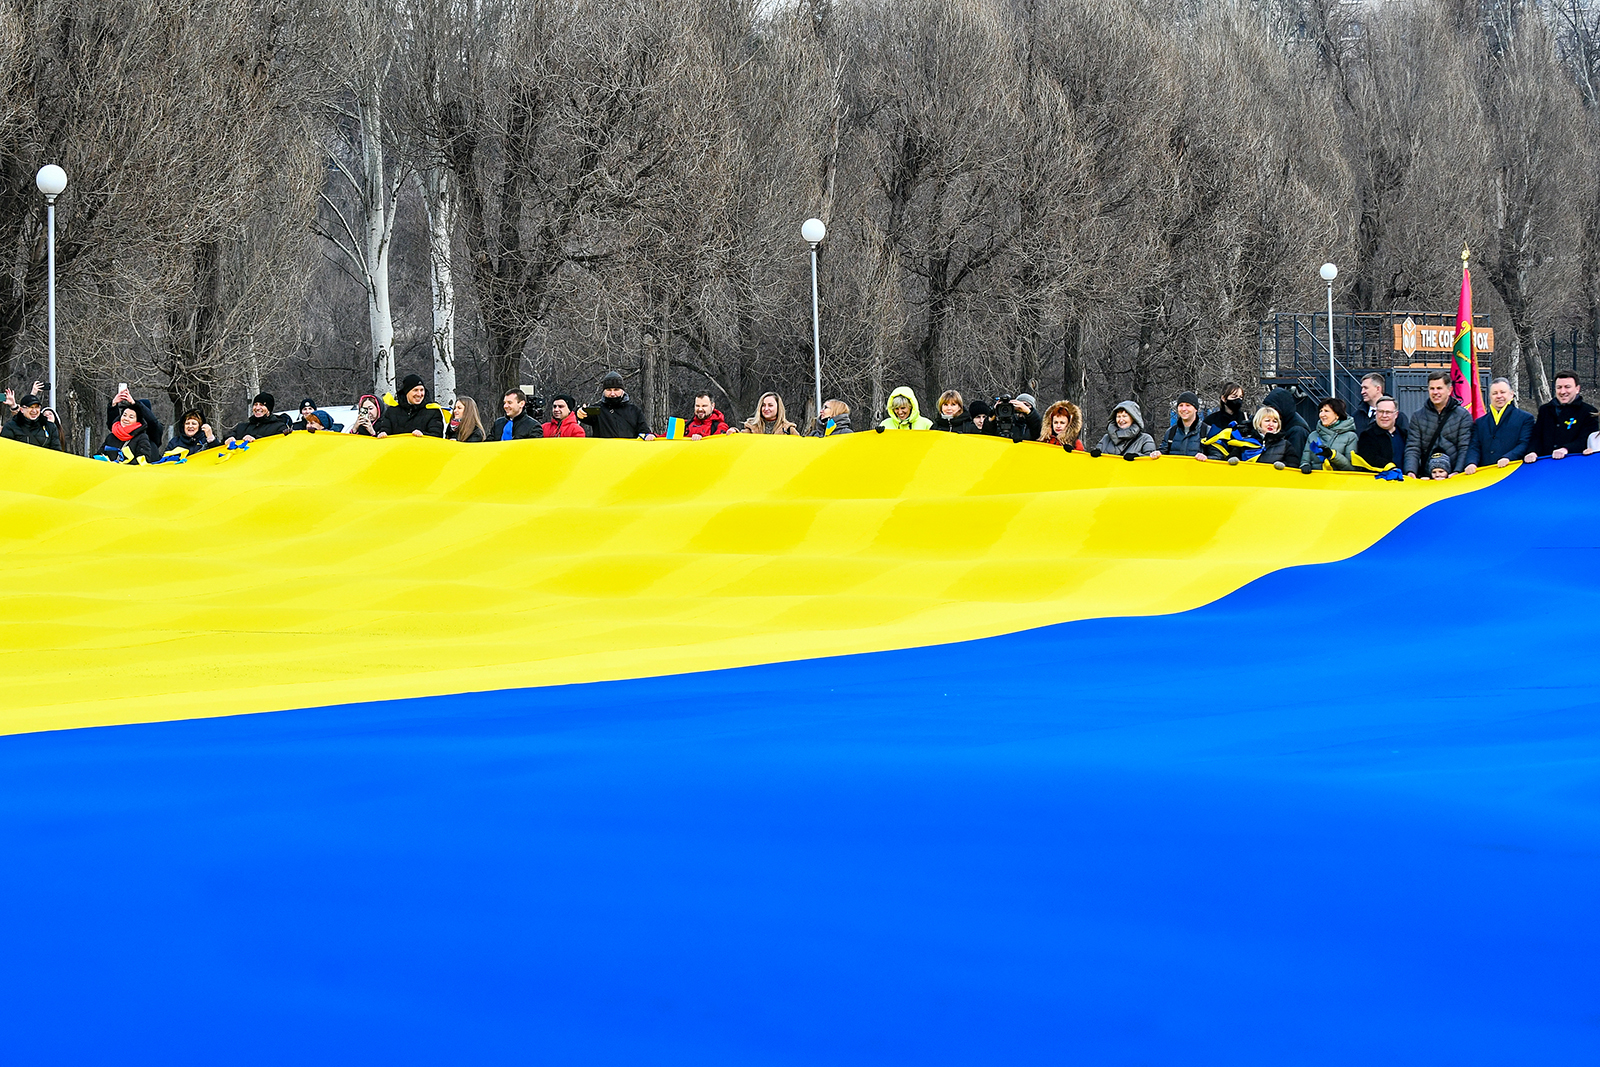 People hold the State Flag of Ukraine measuring 50 by 20 metres at the Raduha (Rainbow) cascade of fountains on the Day of Unity, Zaporizhzhia, southeastern Ukraine on February 16.